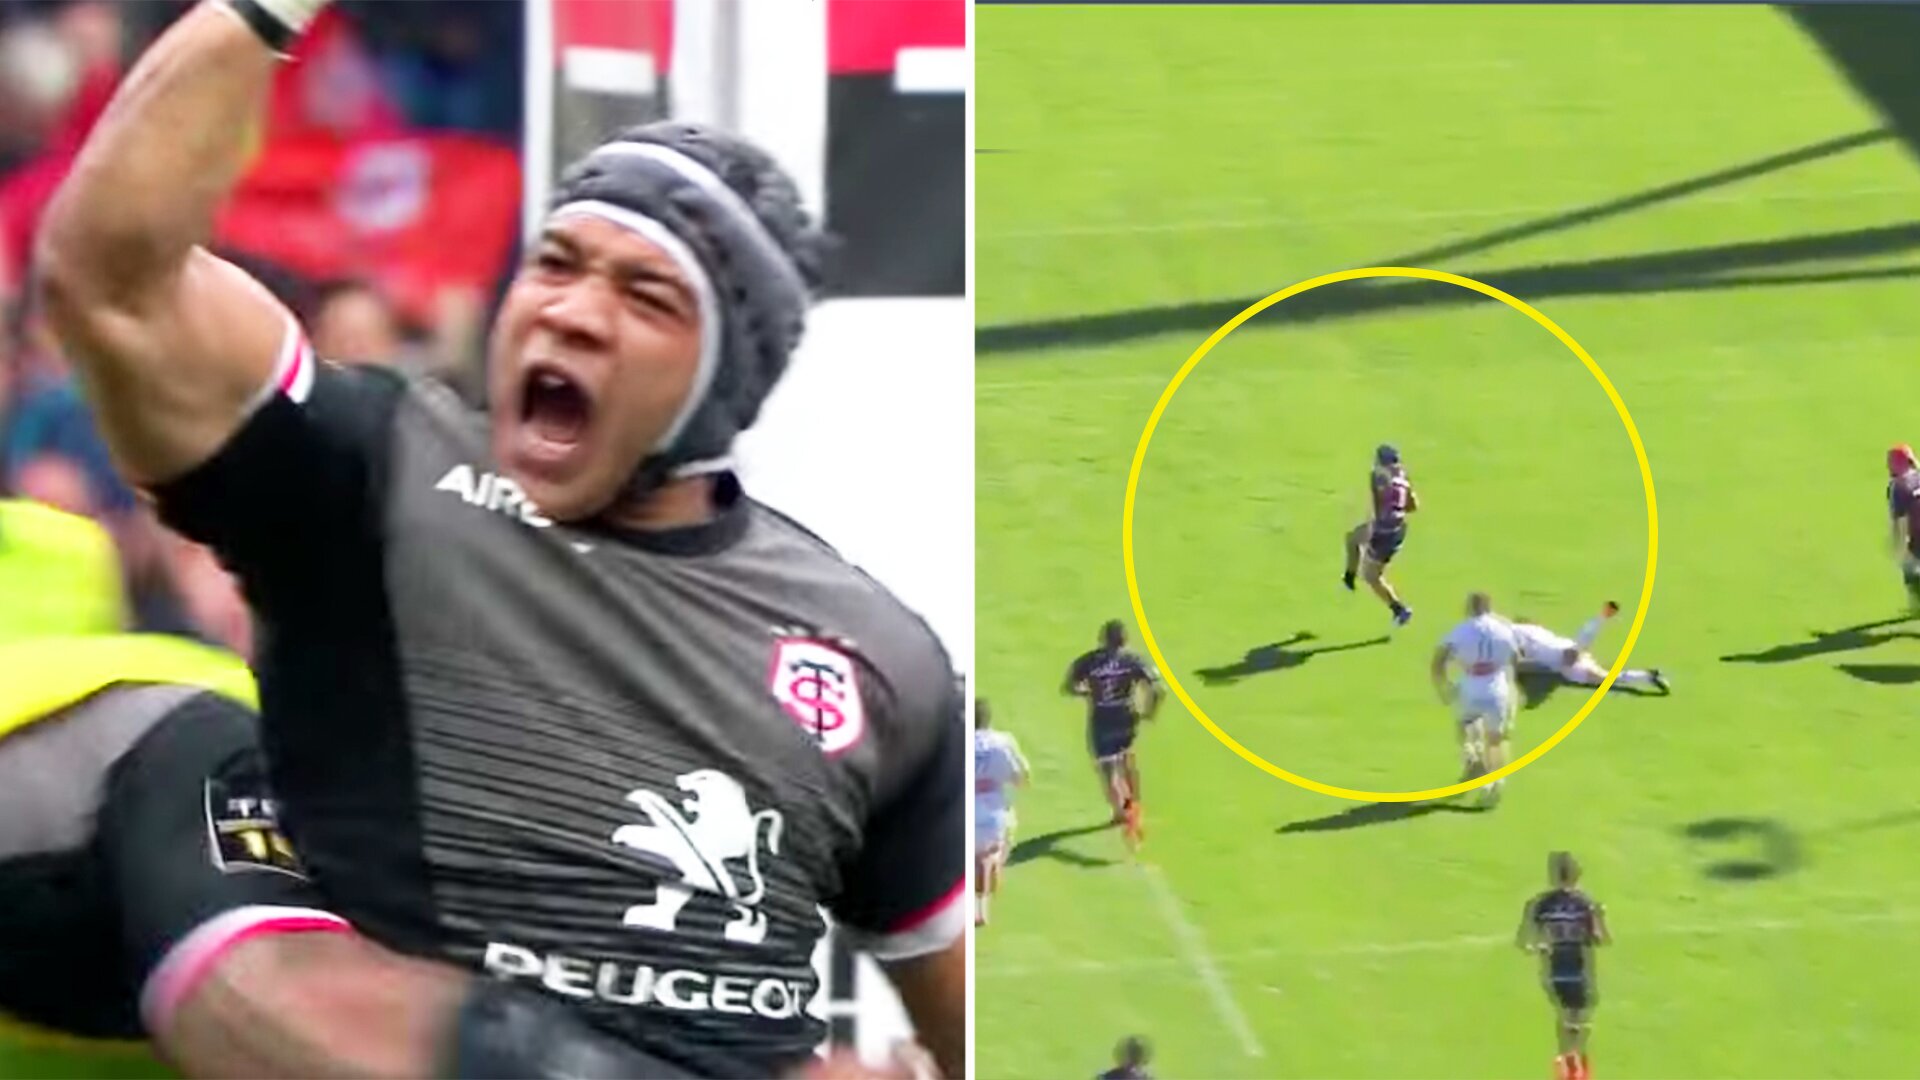 Cheslin Kolbe goes full RWC final mode with phenomenal try in today's Top 14 clash